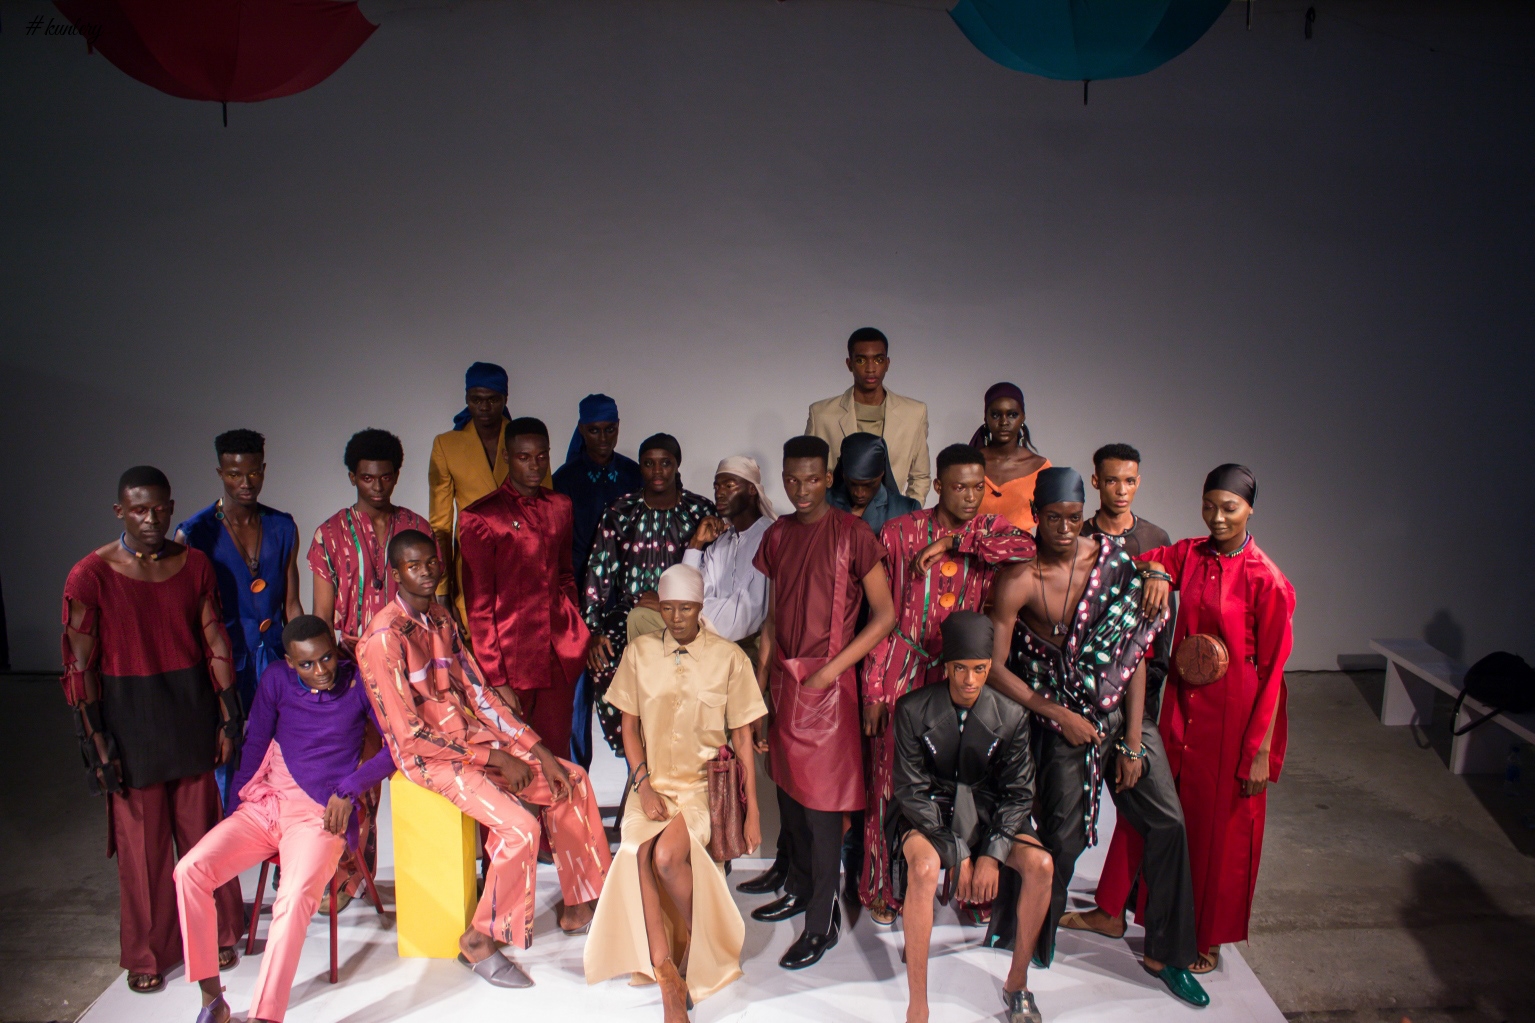 Lagos Fashion Week A/W18 Presentations: Day 2- Sisiano, RE, Kenneth Ize, Style Temple, Orange Culture